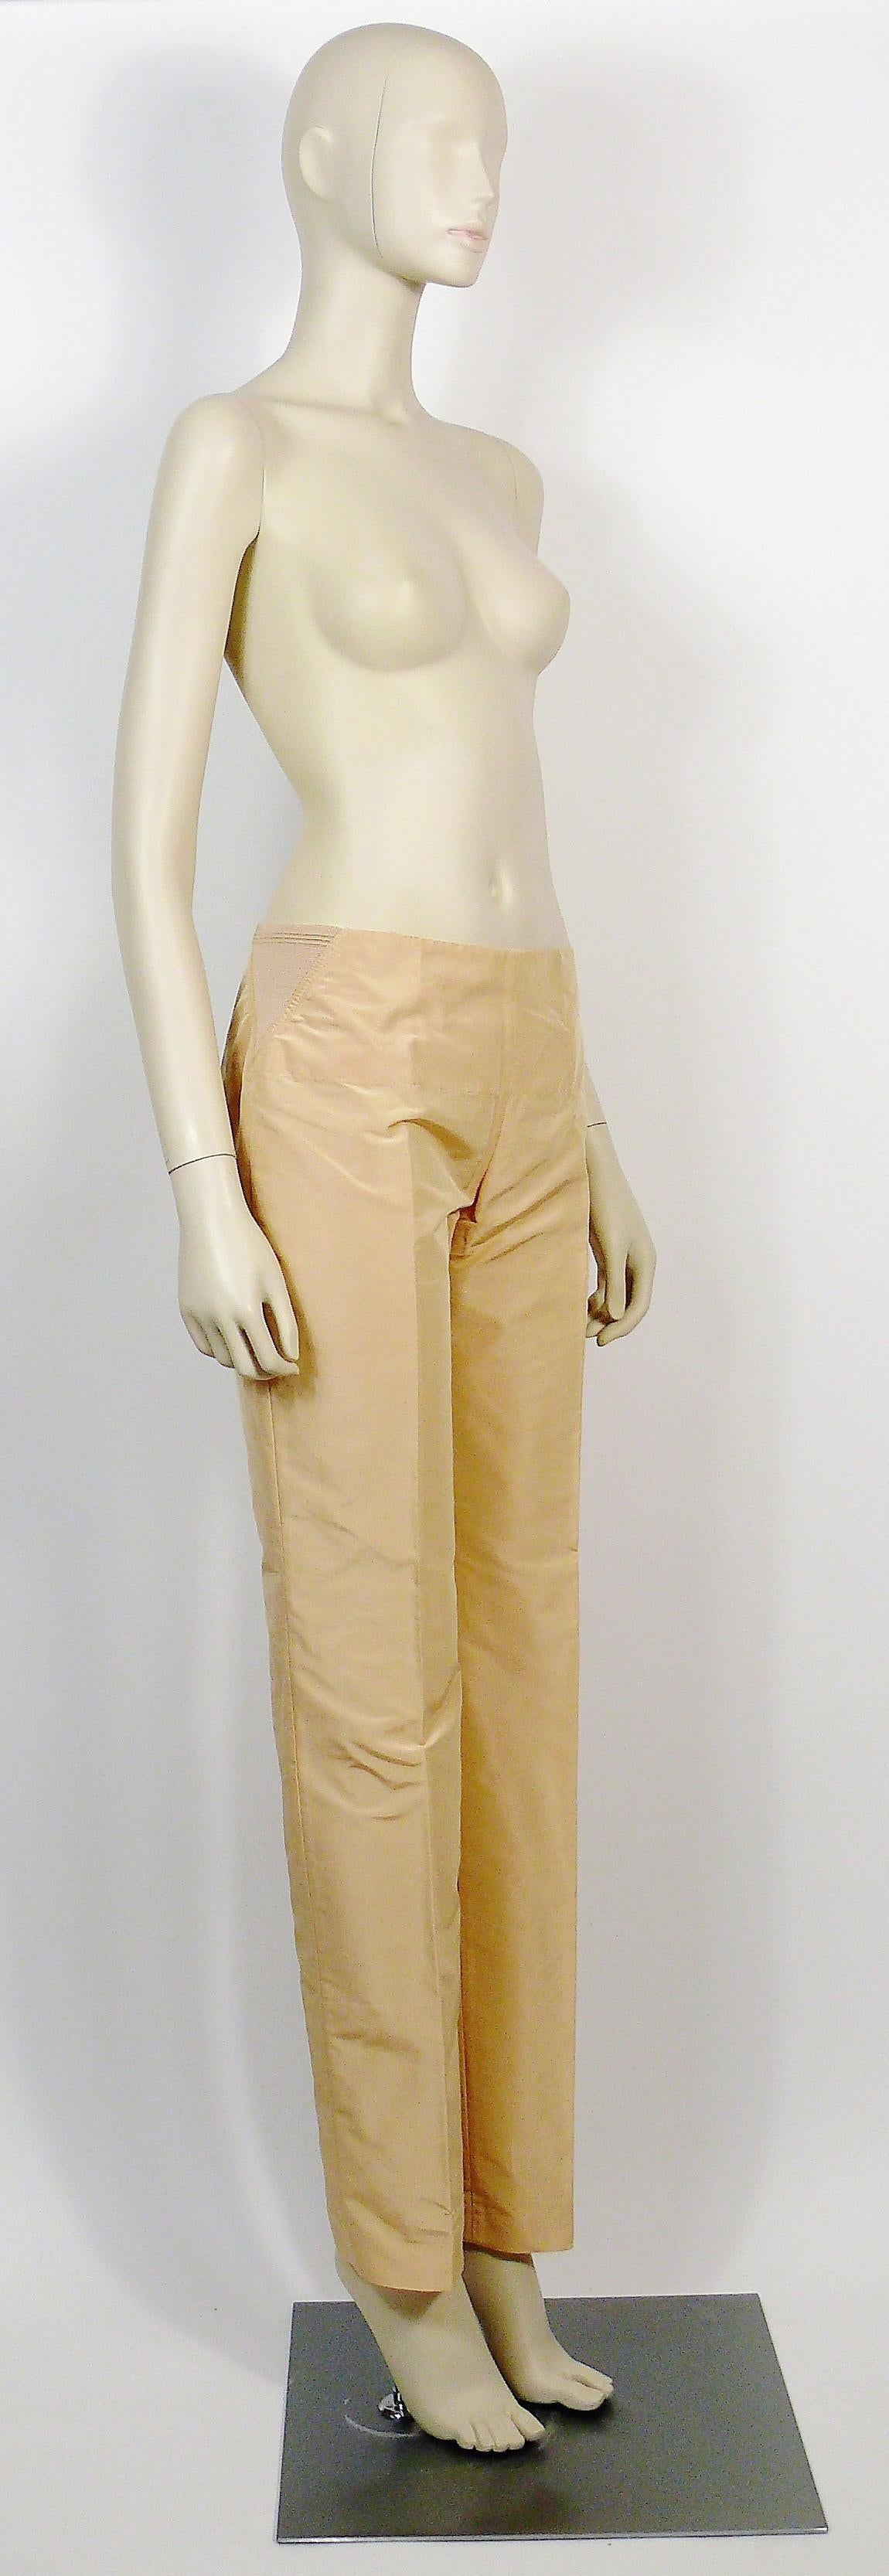 Beige Jean Paul Gaultier Iconic Vintage Peach Corset-Inspired Pant Suit USA Size 6